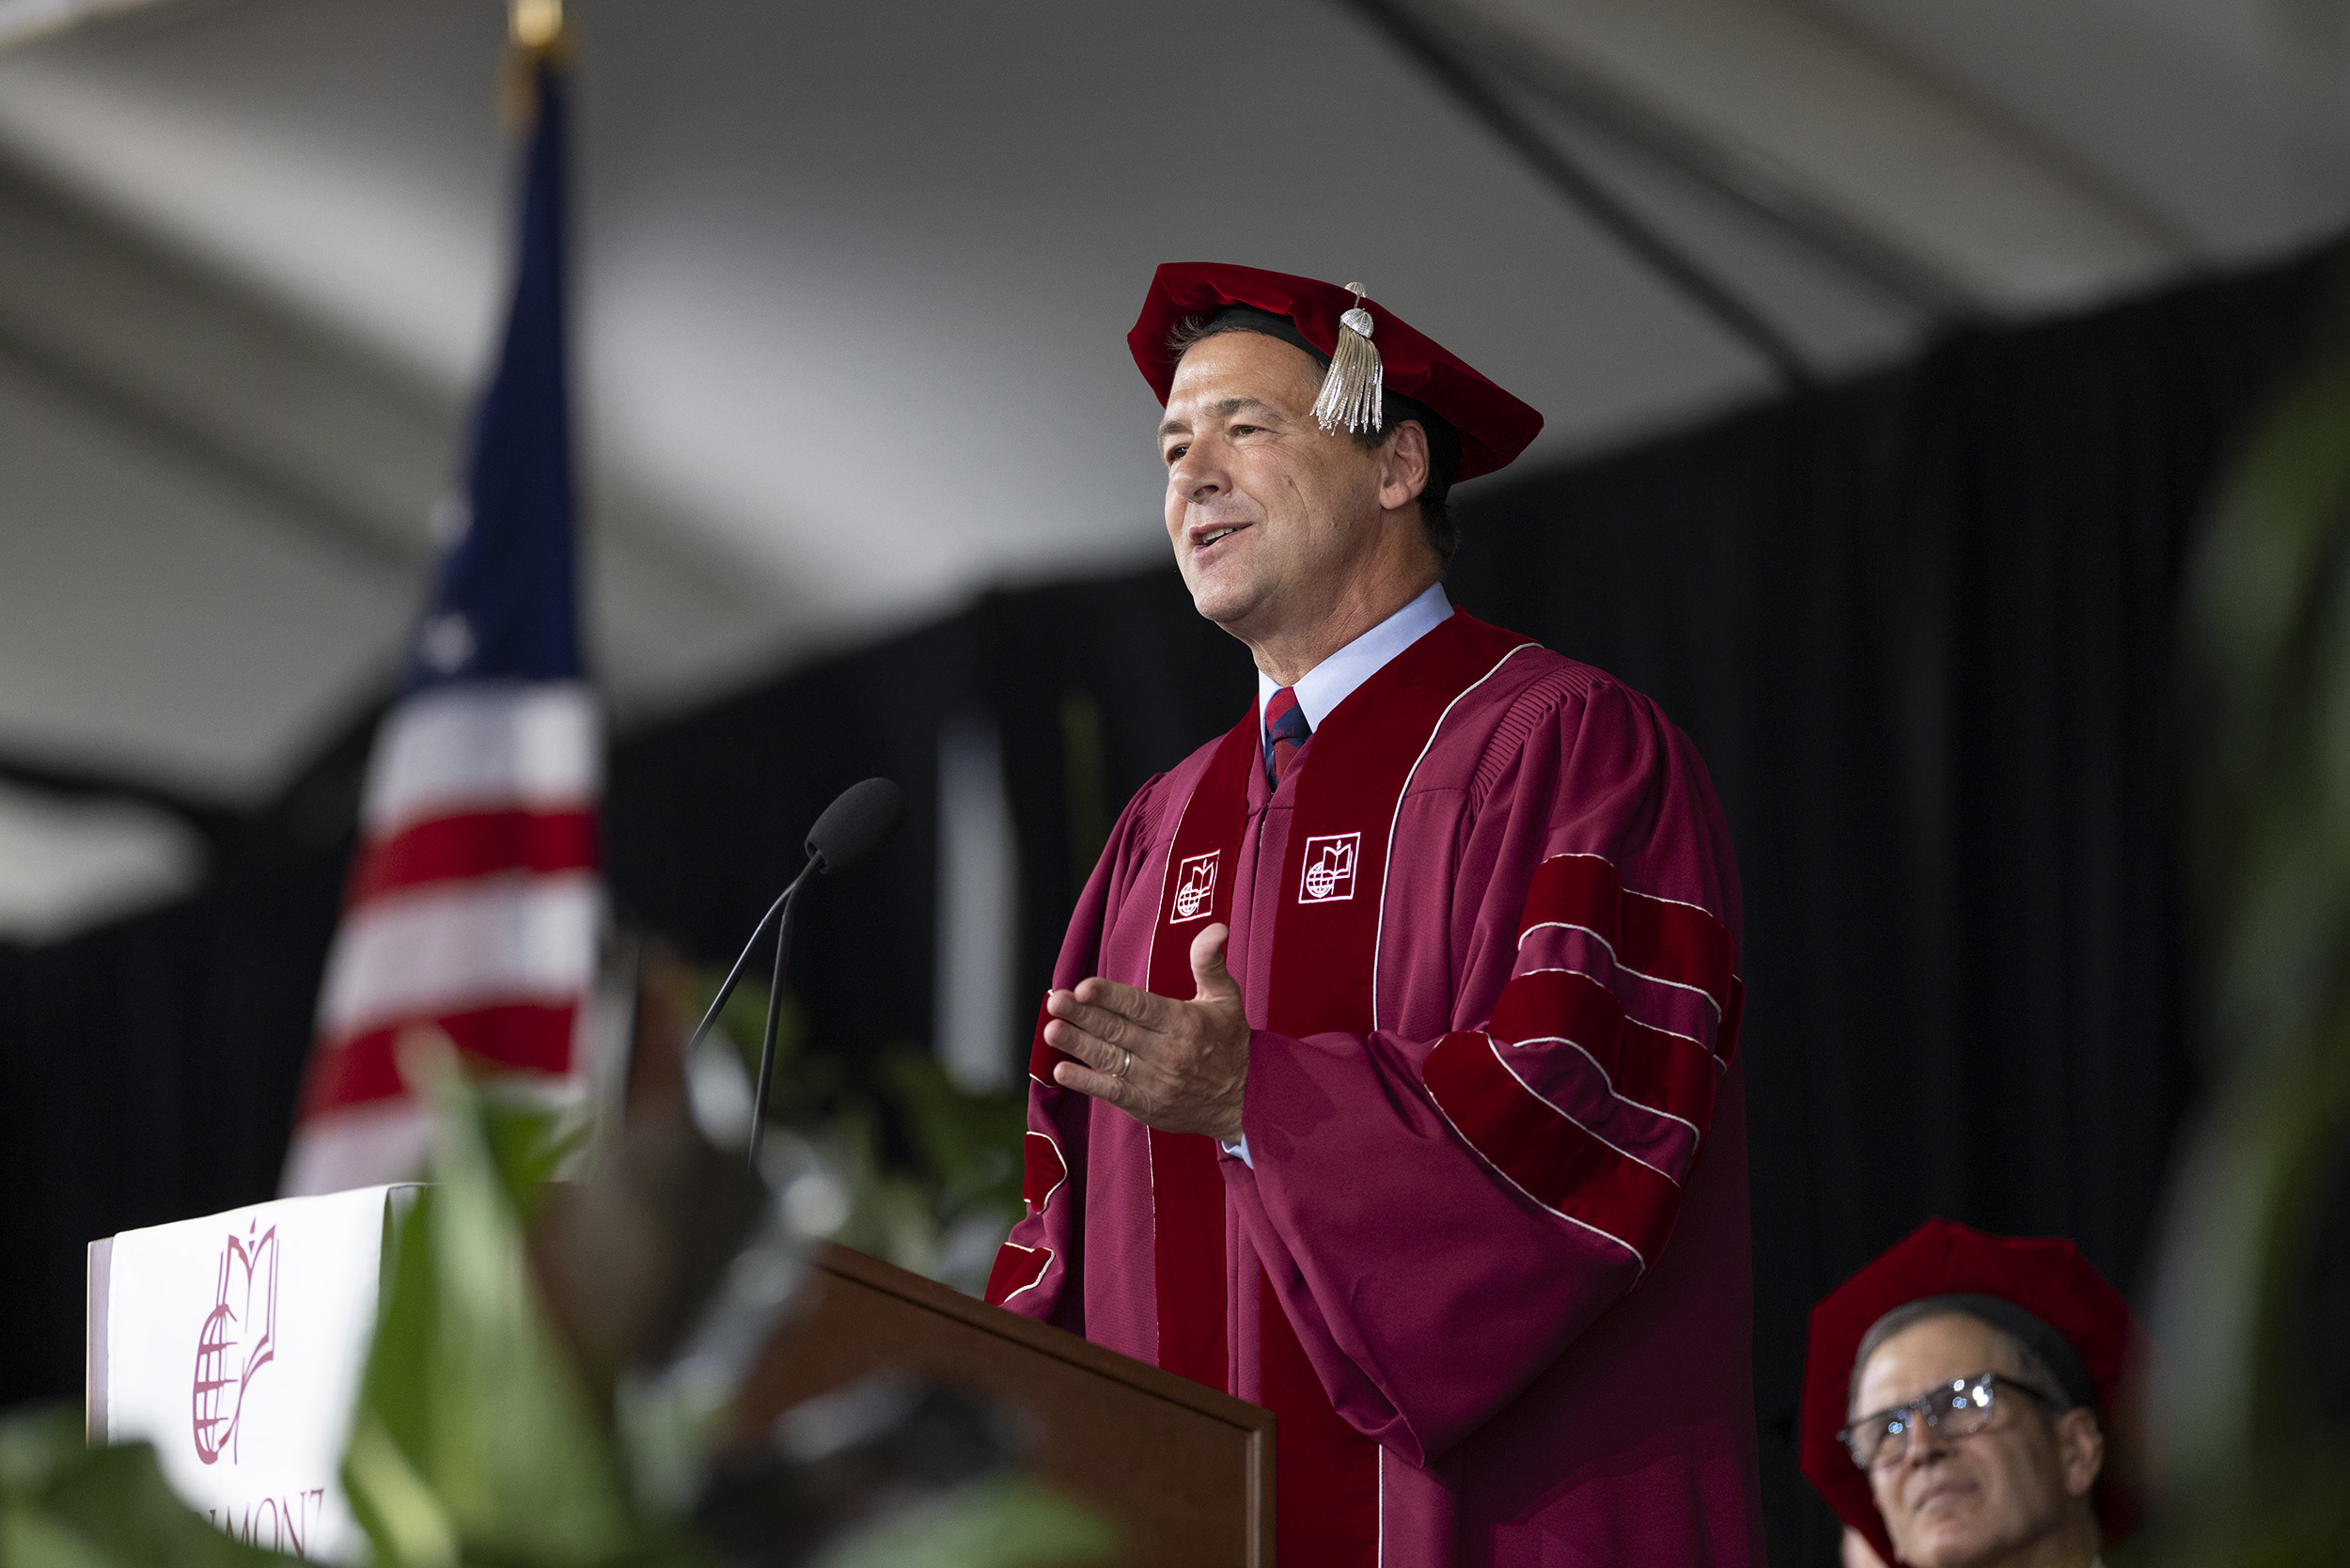 Stephen C. Bullock ’88 P’24 delivers his keynote address on stage during commencement for classes of 2020 and 2021.